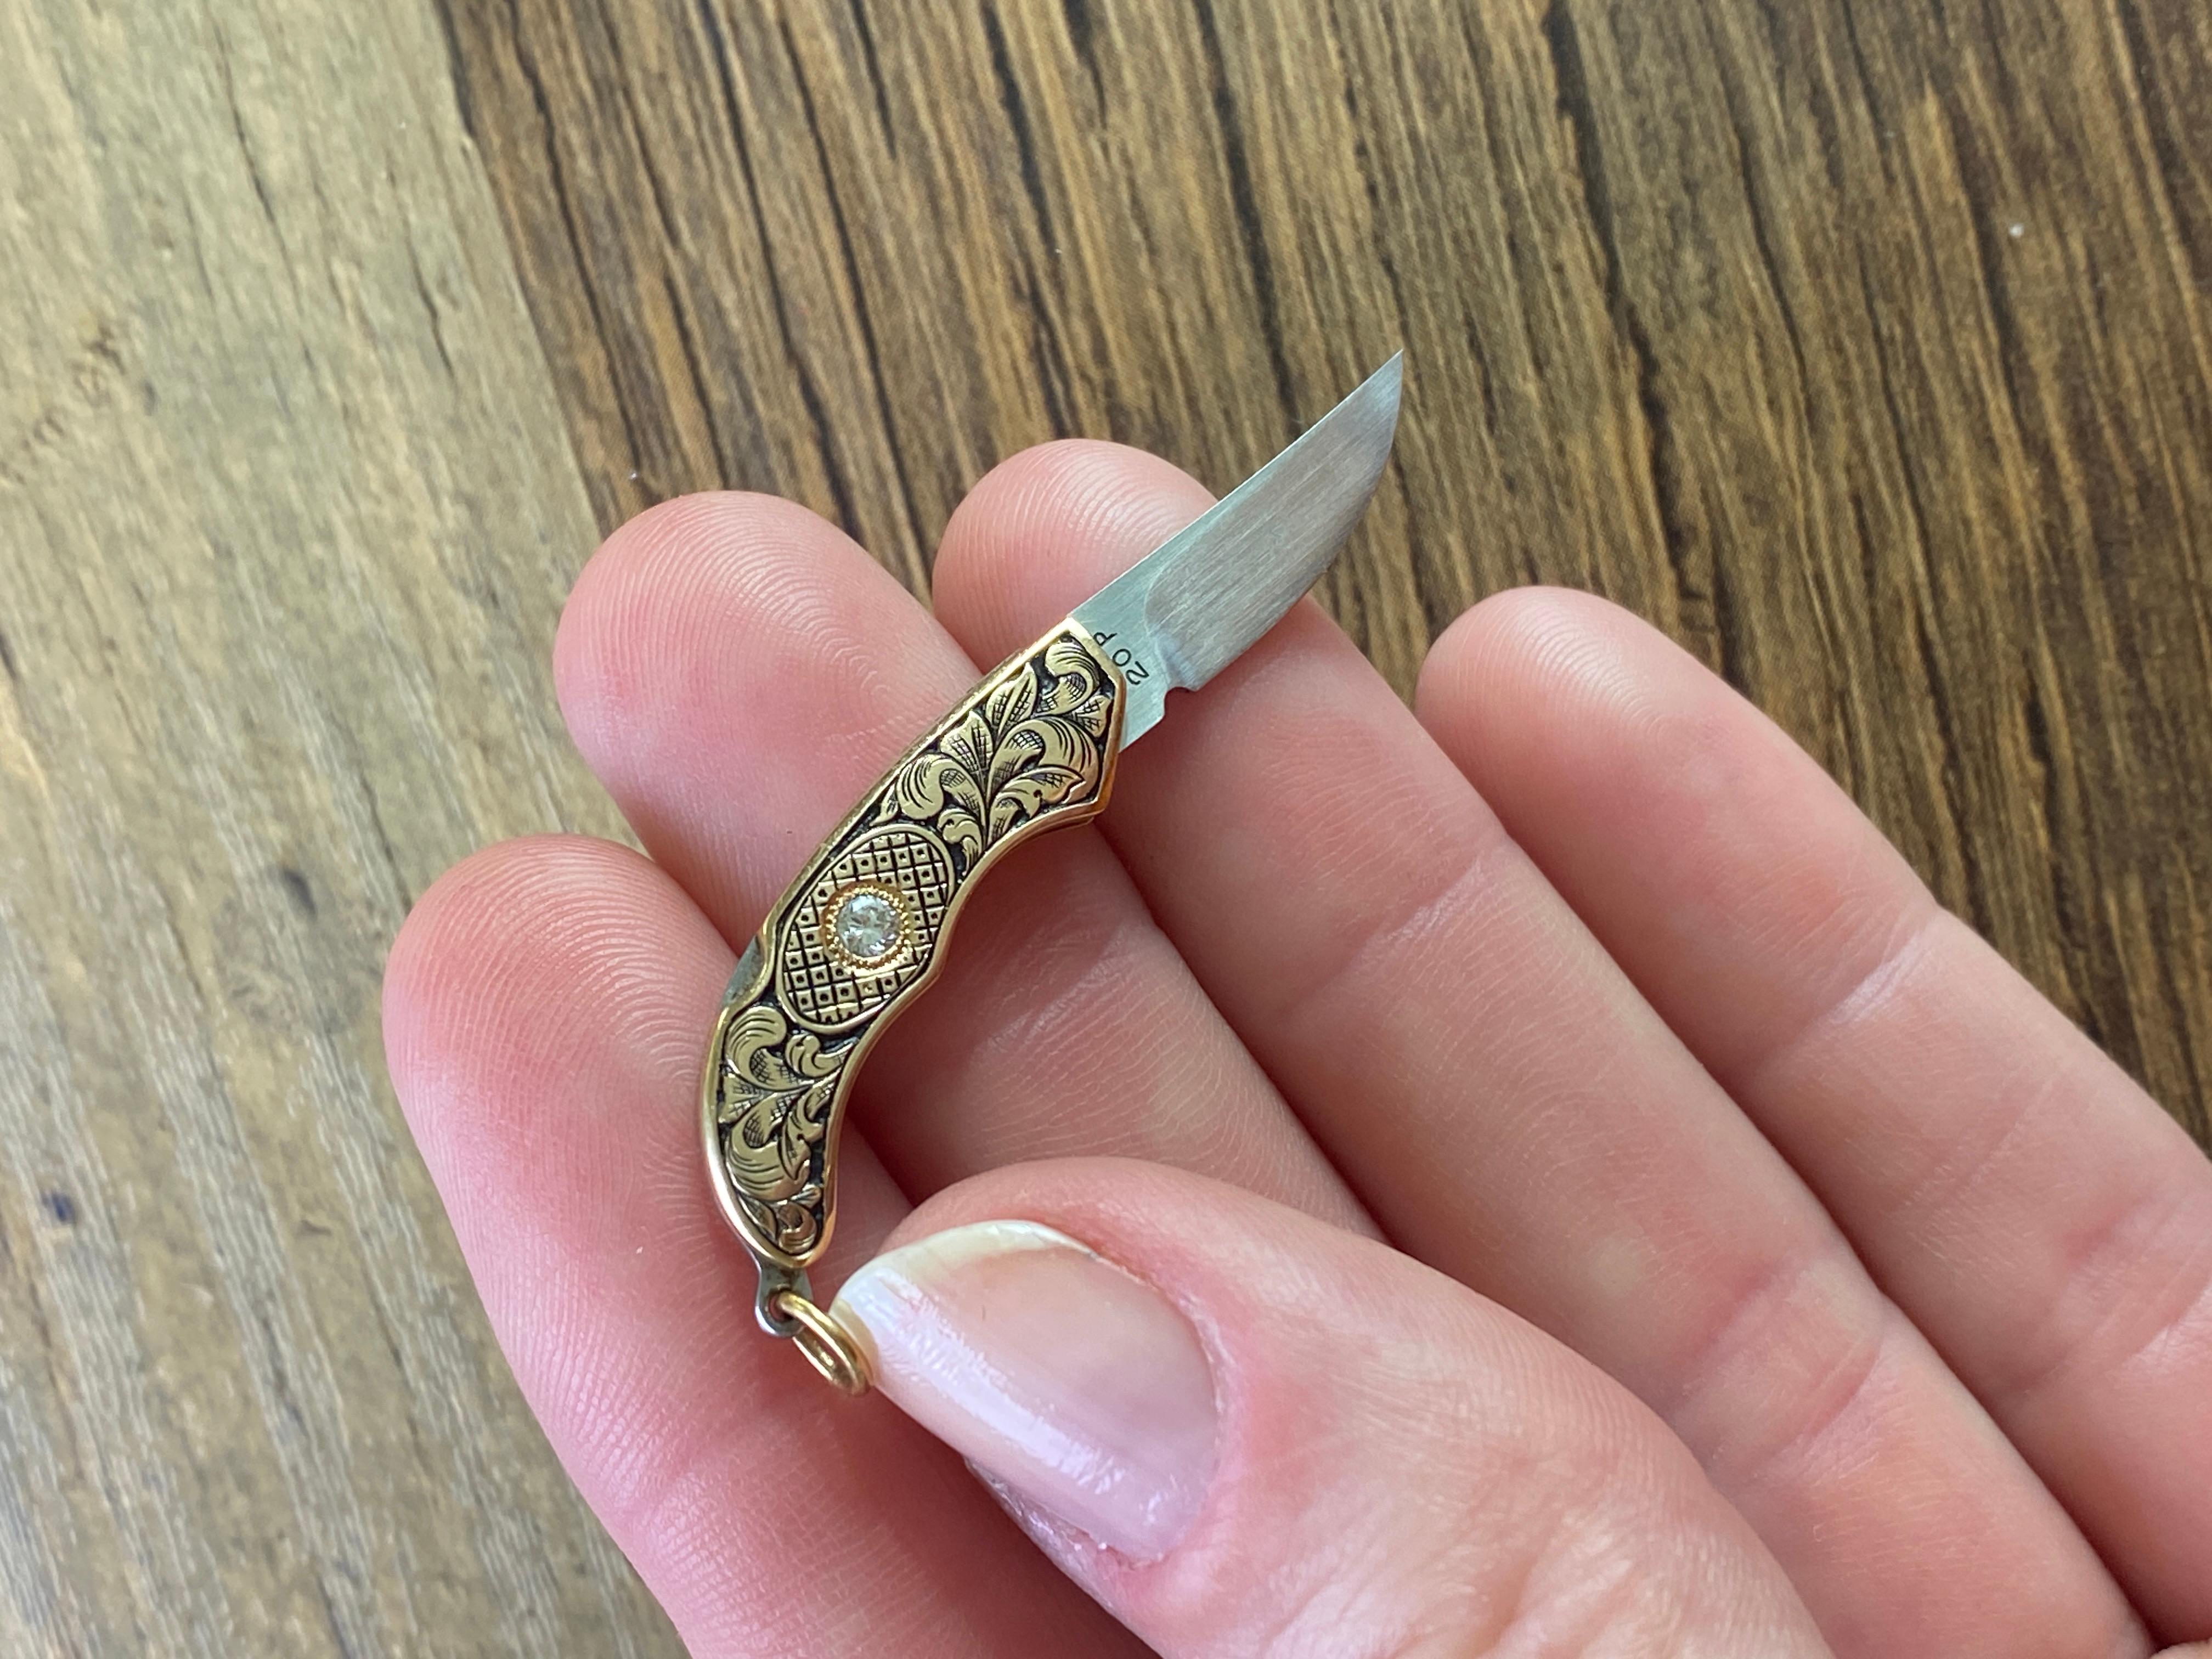 Rare, Jim Martin, Miniature 14kt Yellow Gold Miniature Knife with Diamonds on both sides. Gold ring for necklace. Chain not included. Total weight: 5.5 grams.  Diamond size: 2.25mm, 14k gold, working miniature knife necklace pendant